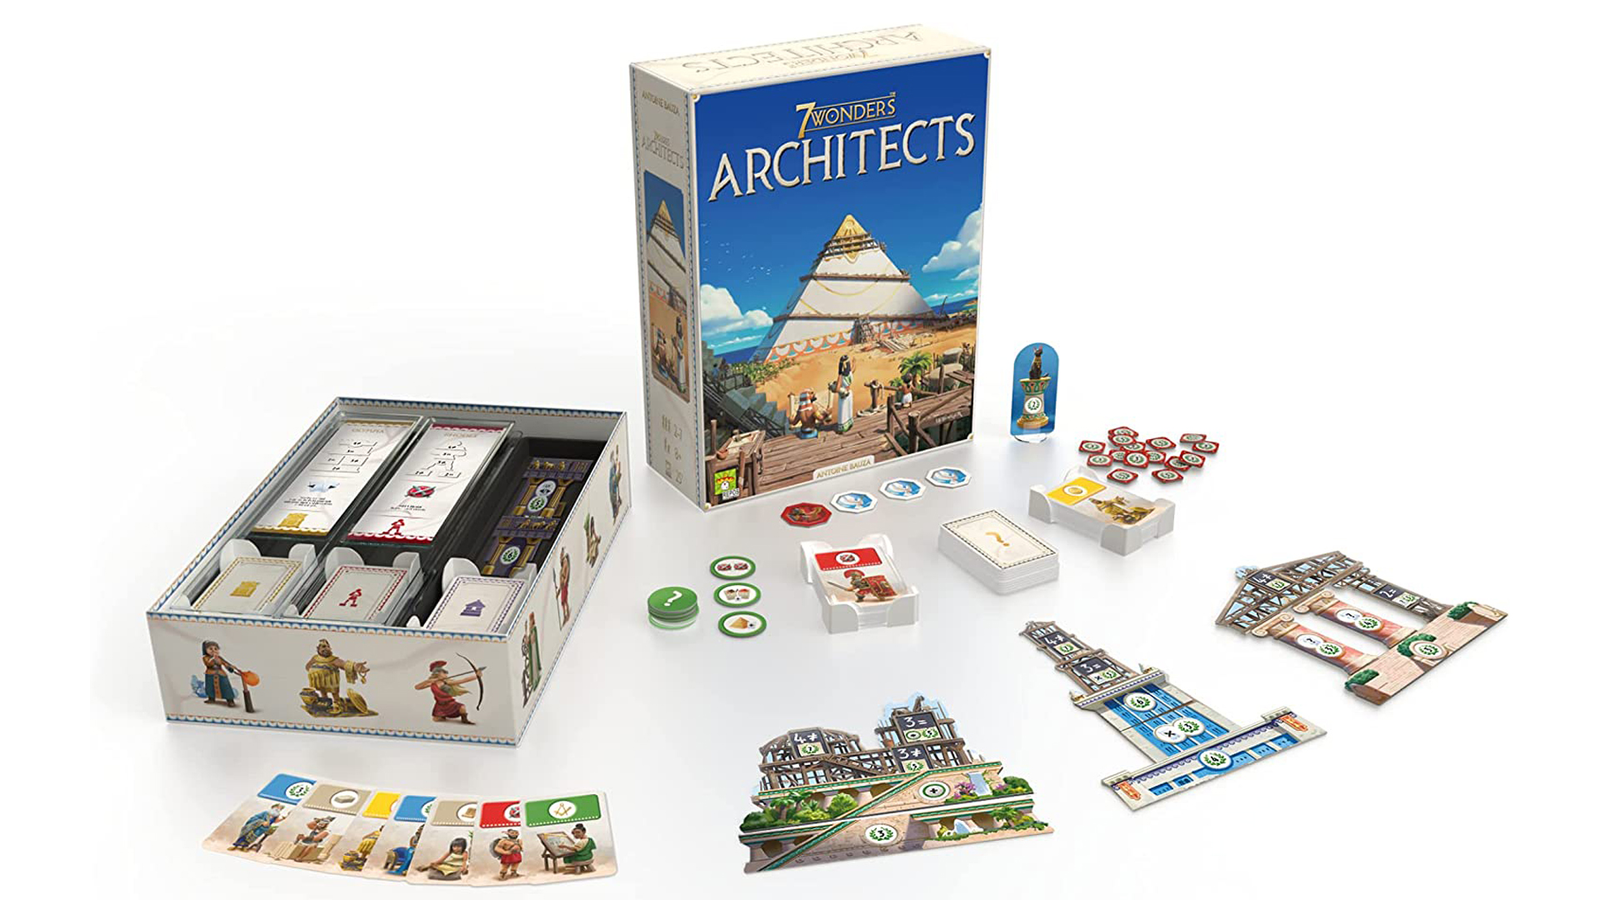 Spice It Up: 7 WONDERS: ARCHITECTS review – Board Game Gumbo